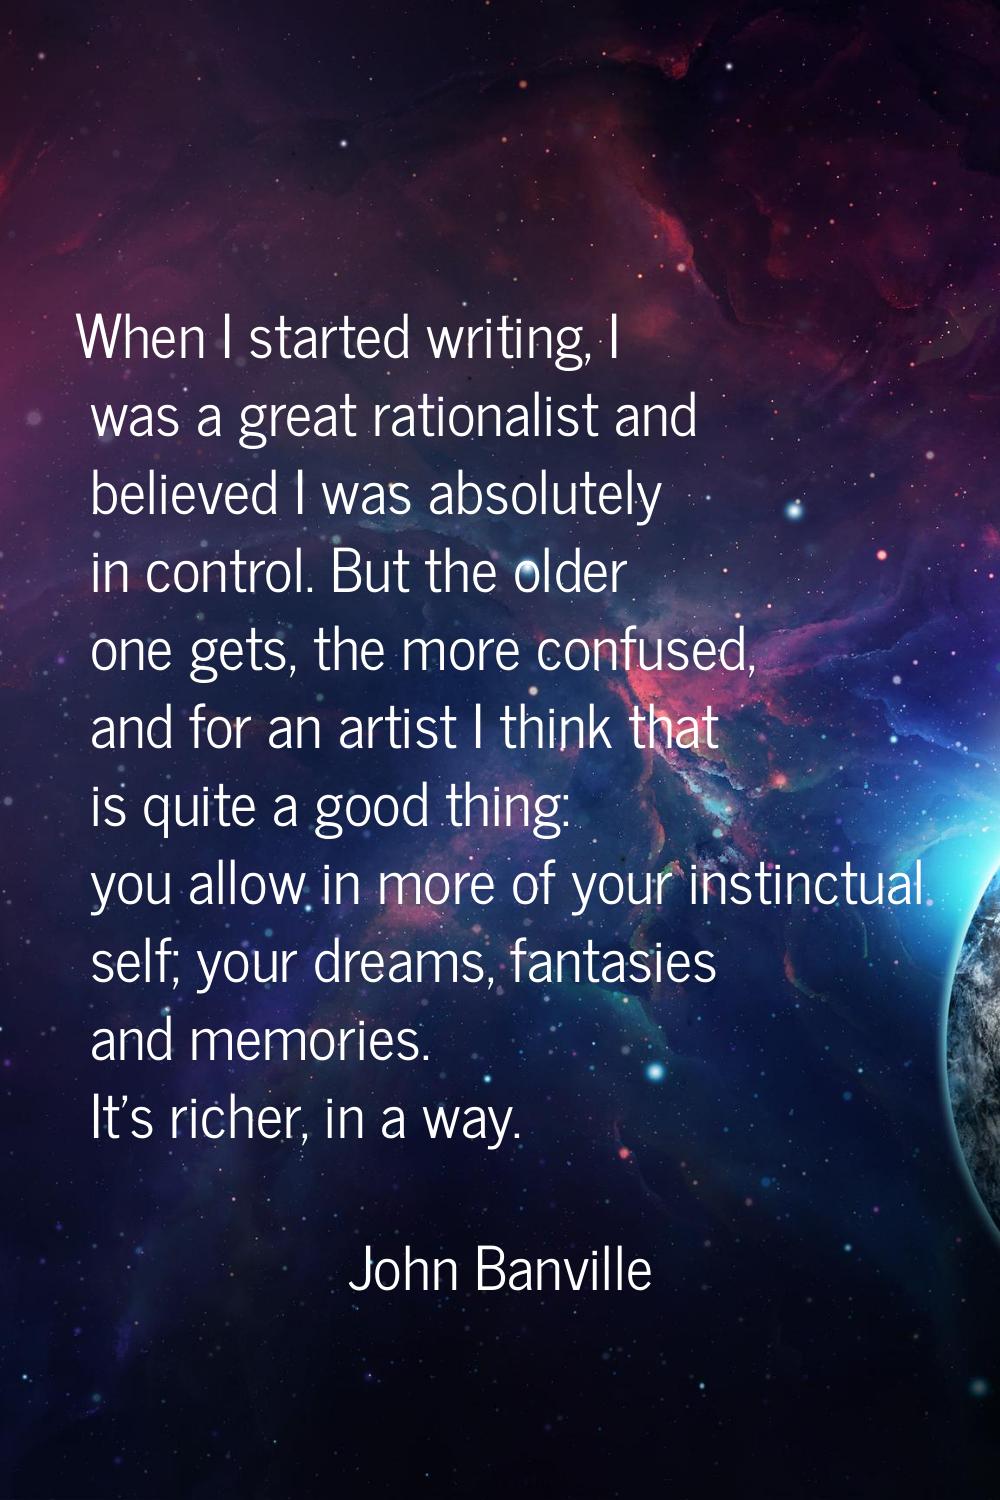 When I started writing, I was a great rationalist and believed I was absolutely in control. But the